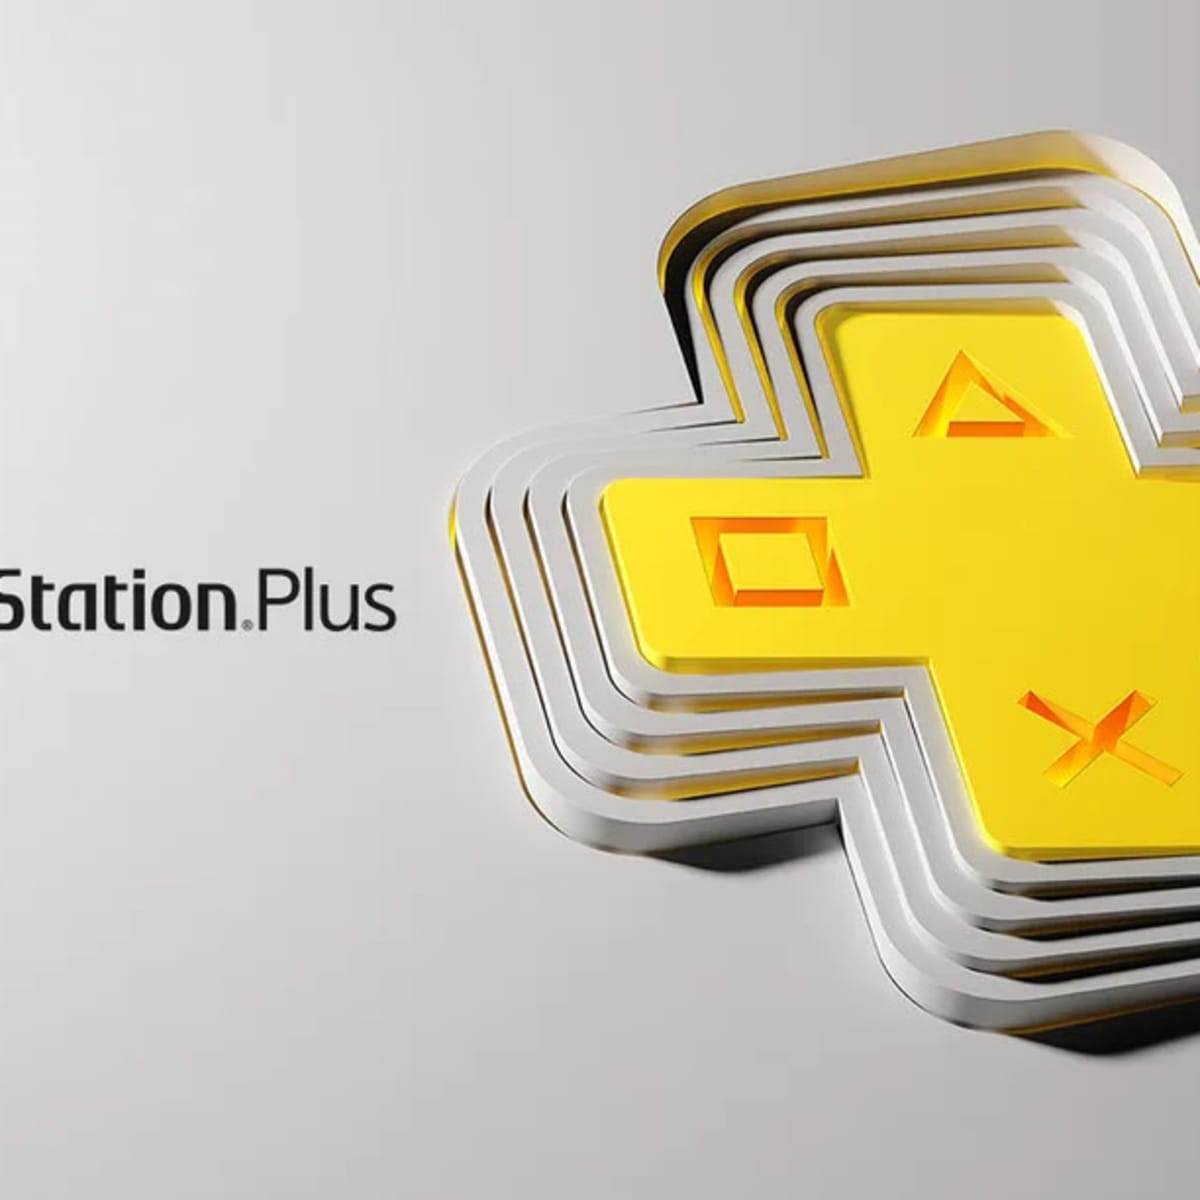 PlayStation Plus Premium games list for January 2023 announced, includes  Devil May Cry 5, Back 4 Blood, and other titles